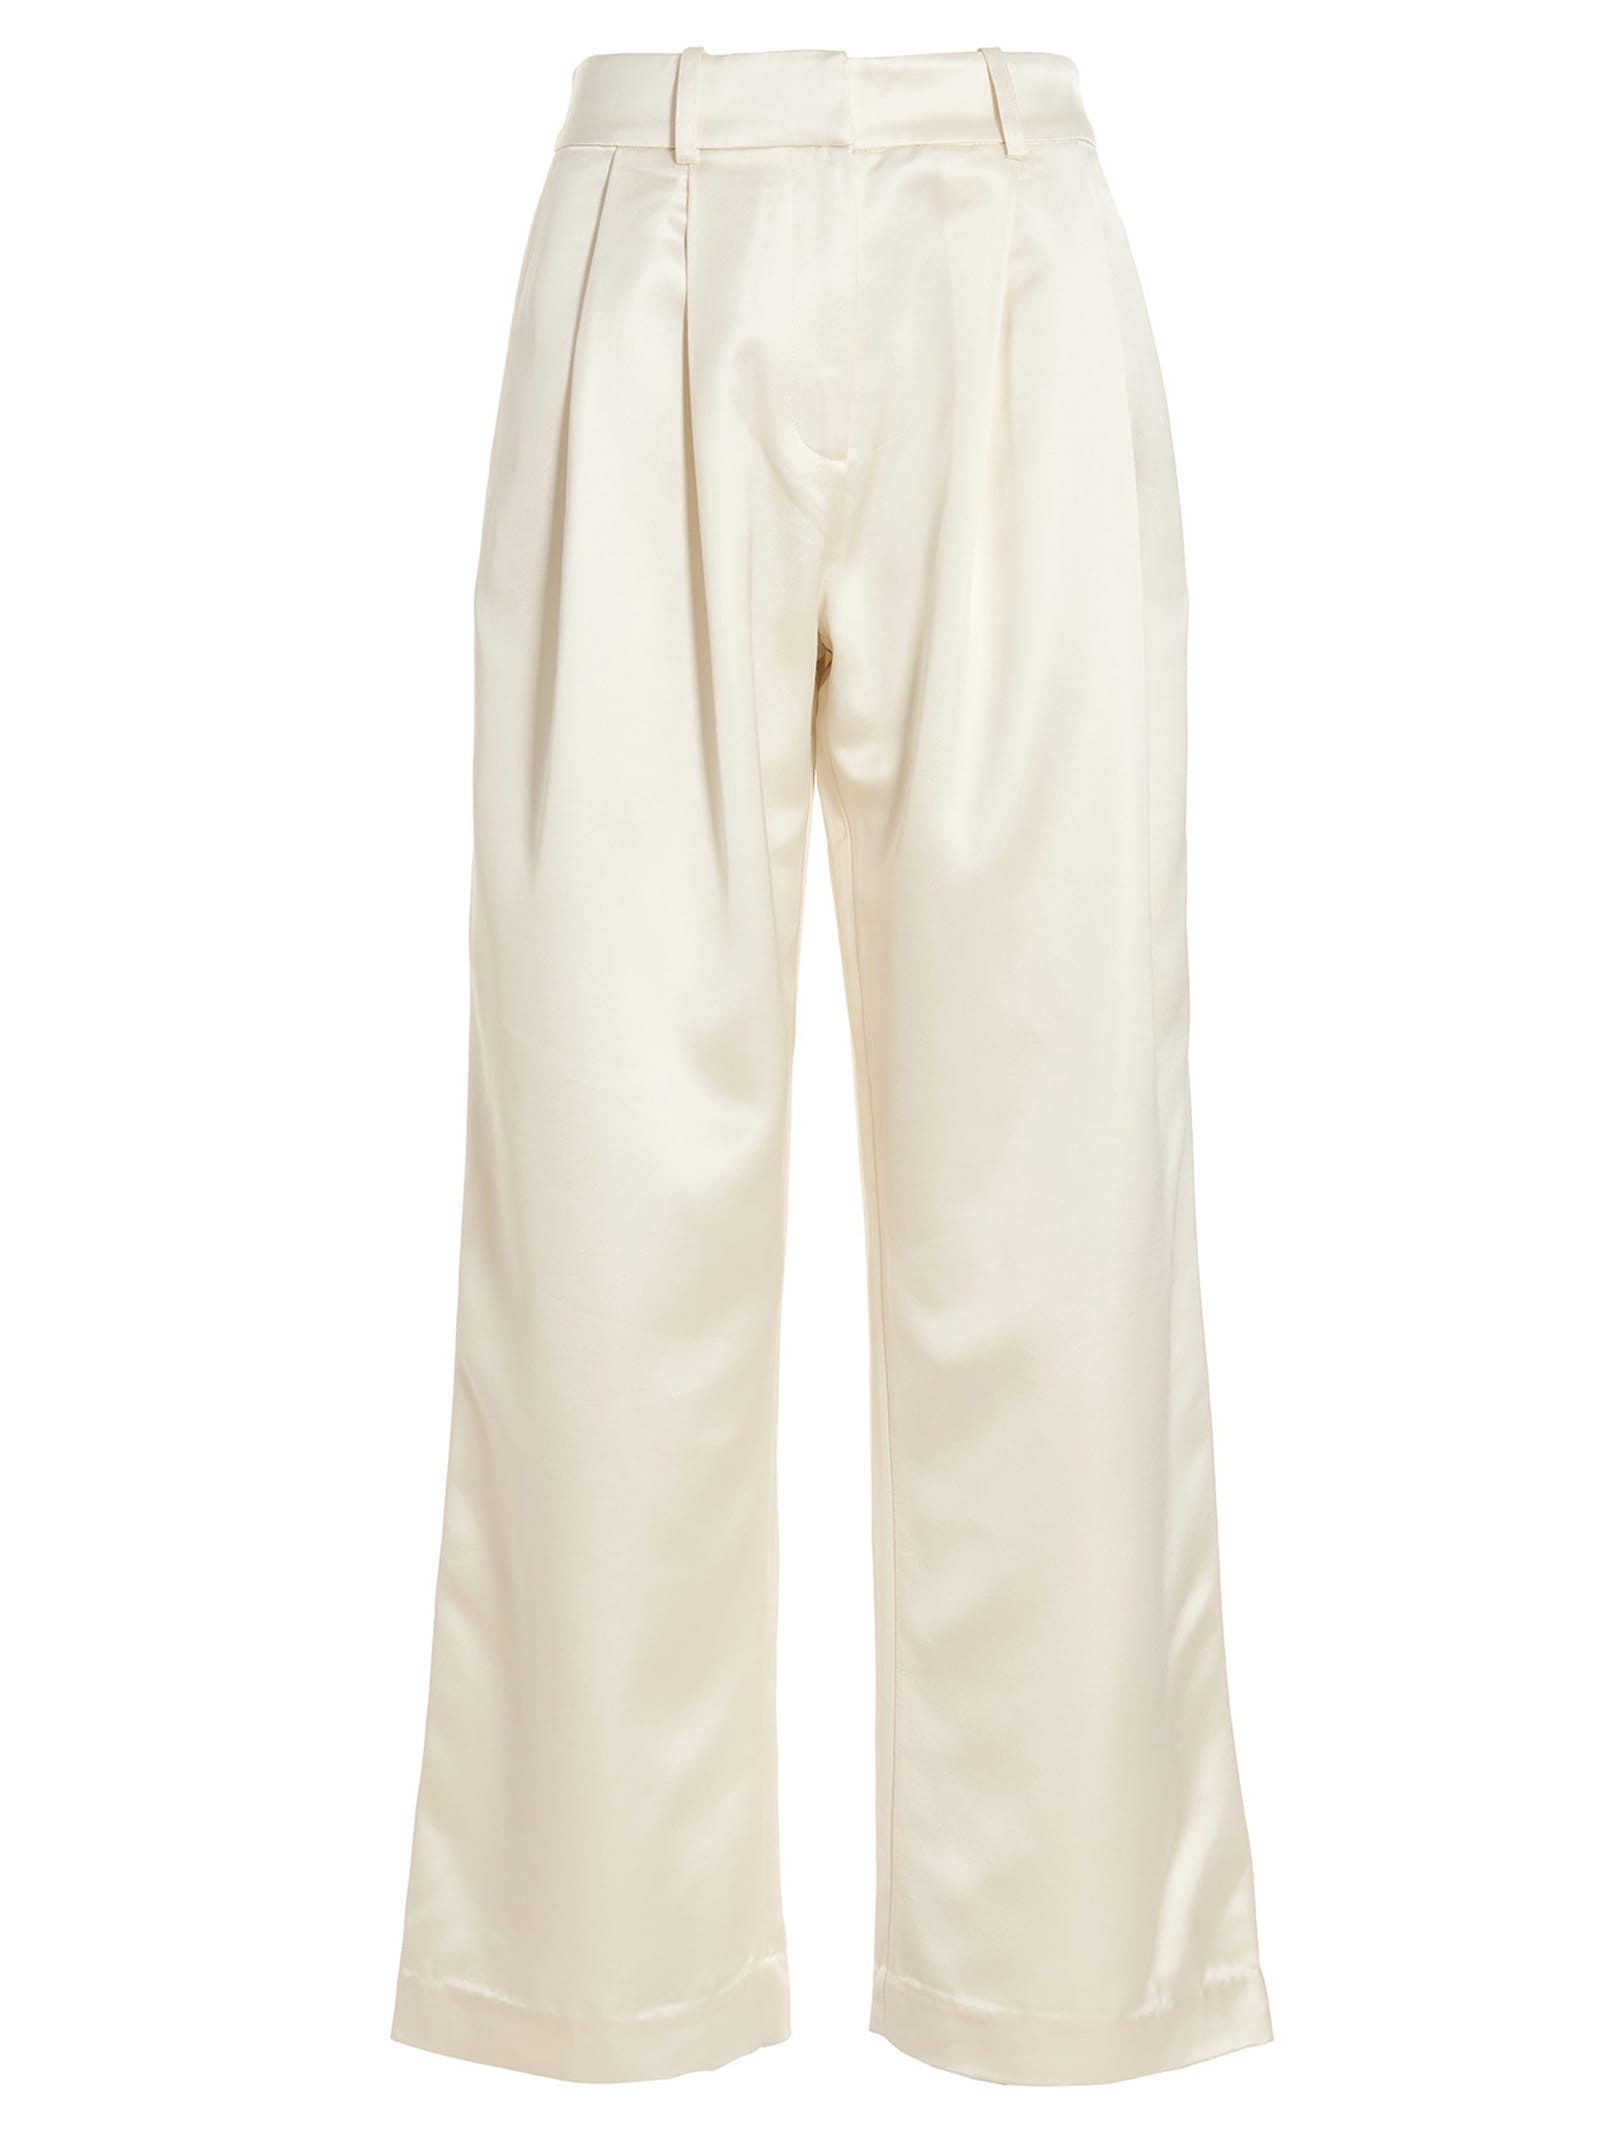 Co Pants With Front Pleats